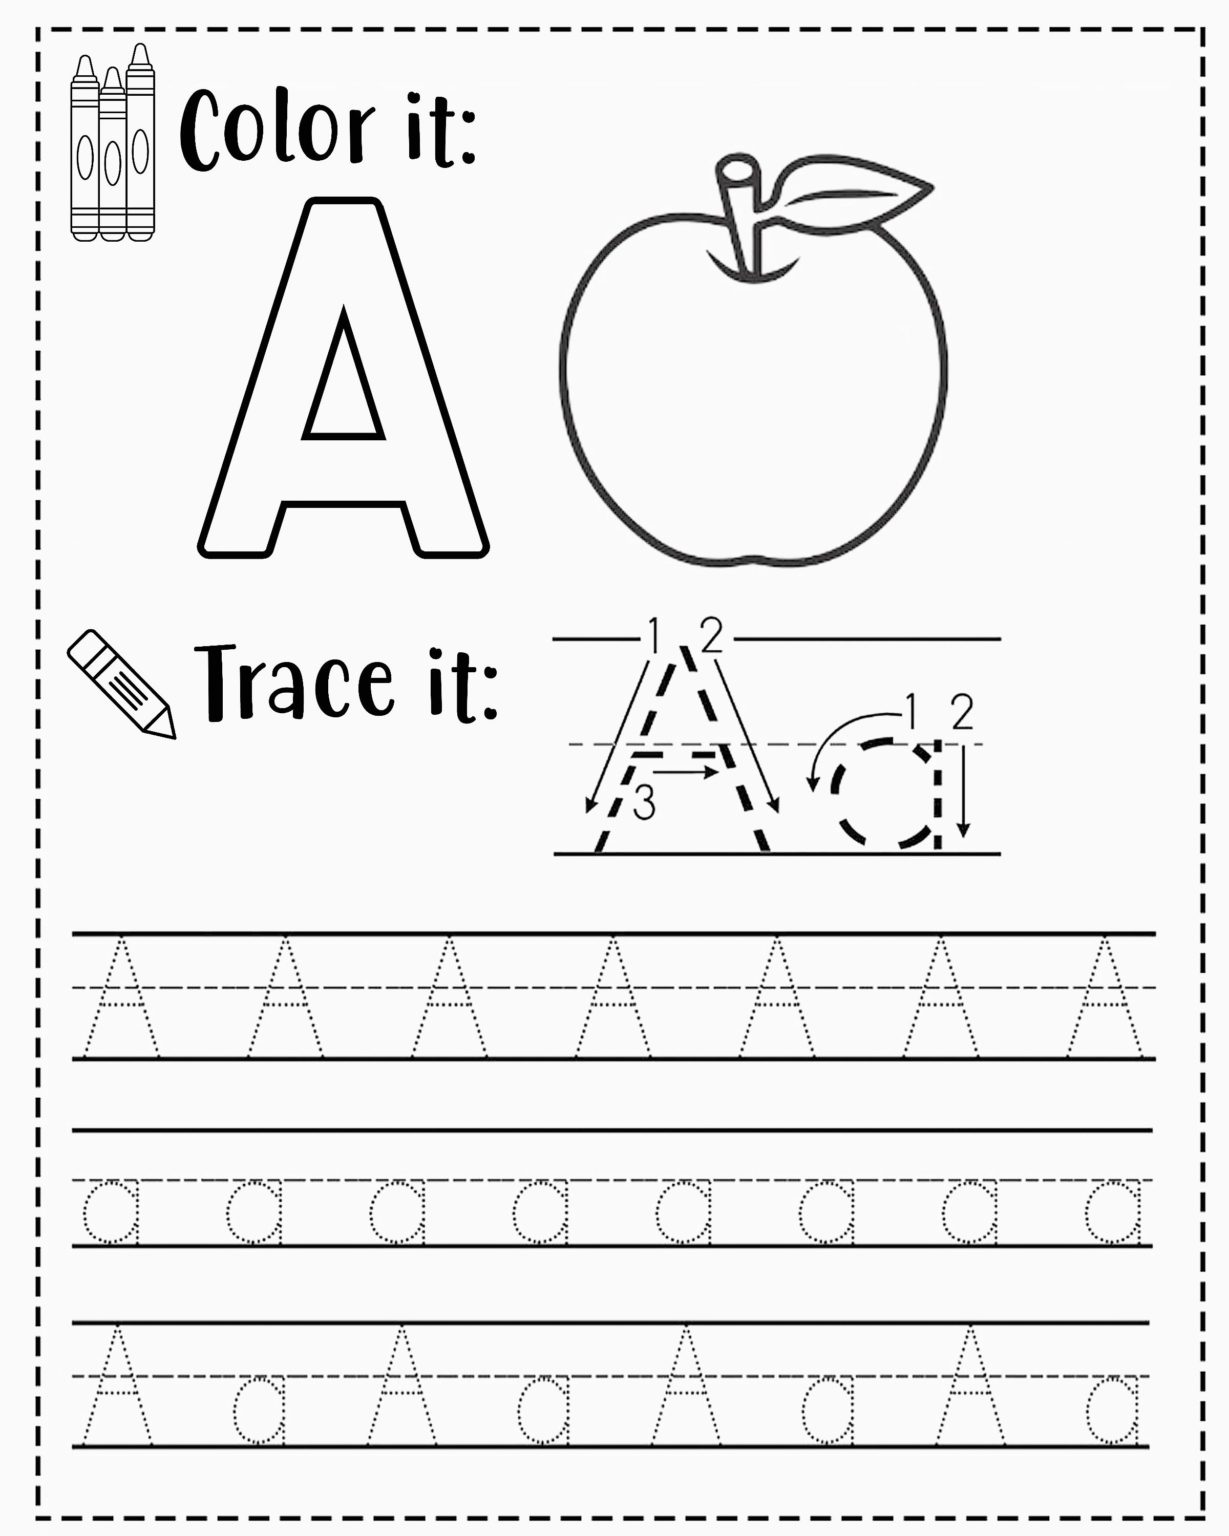 trace-alphabets-worksheets-printable